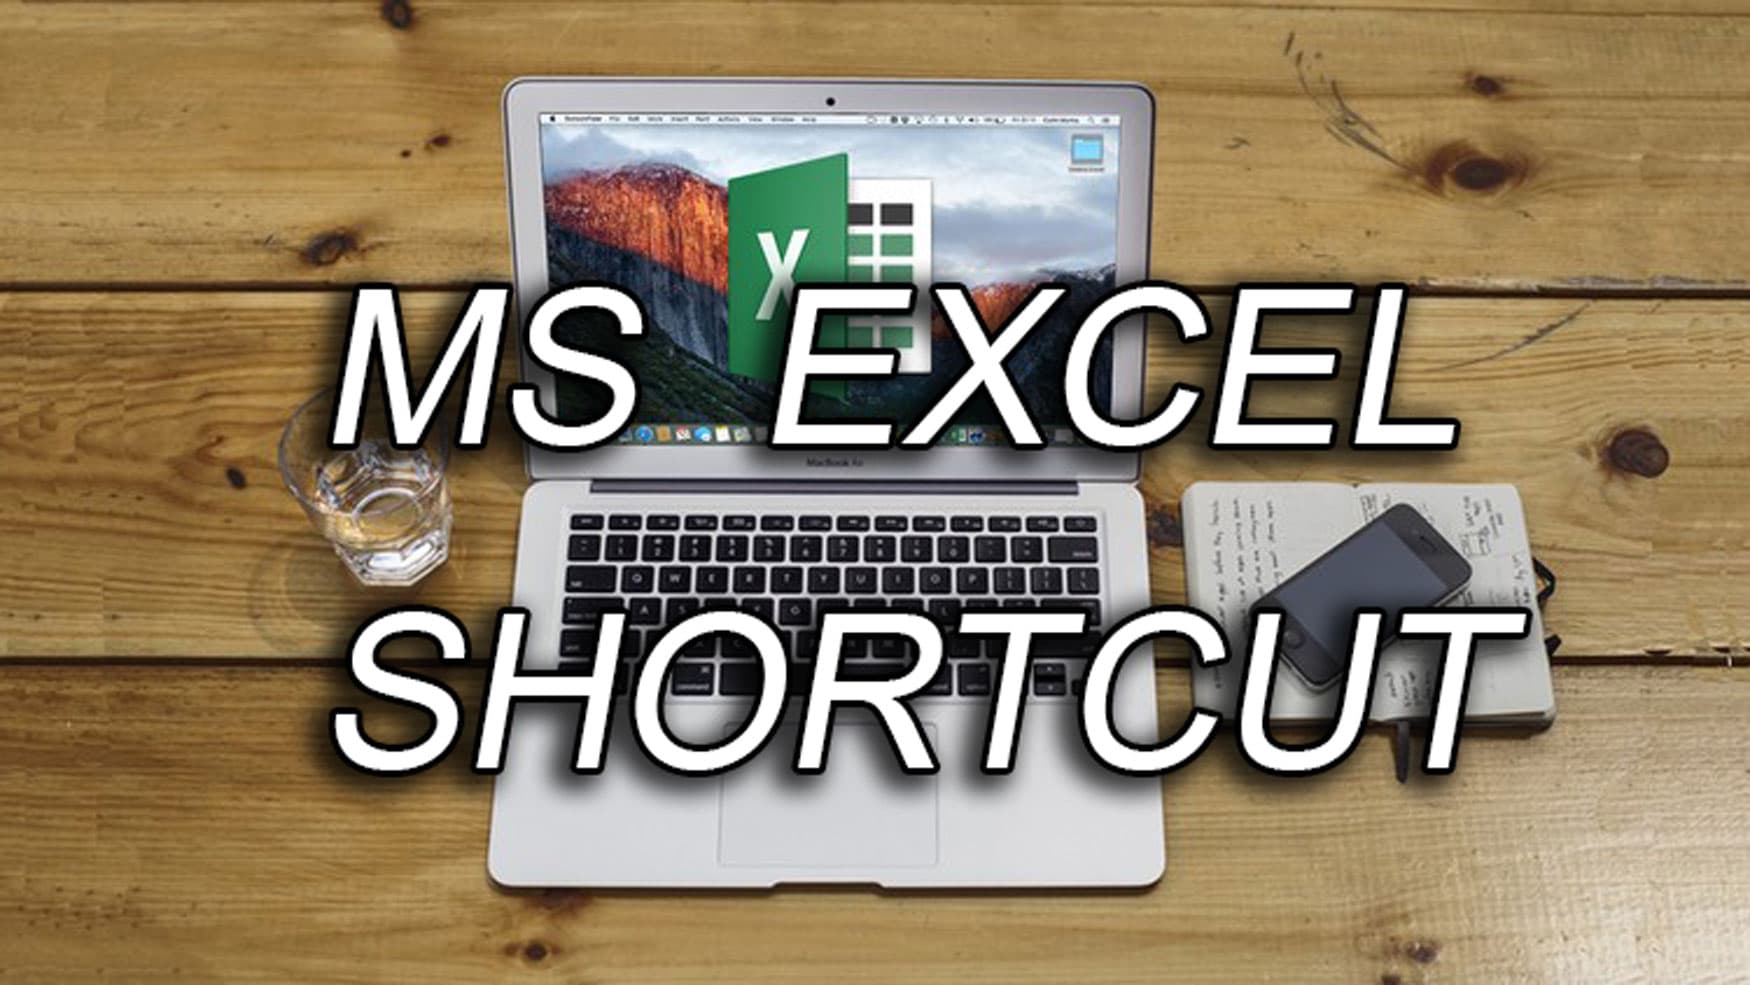 Work Faster with MS Excel shortcut